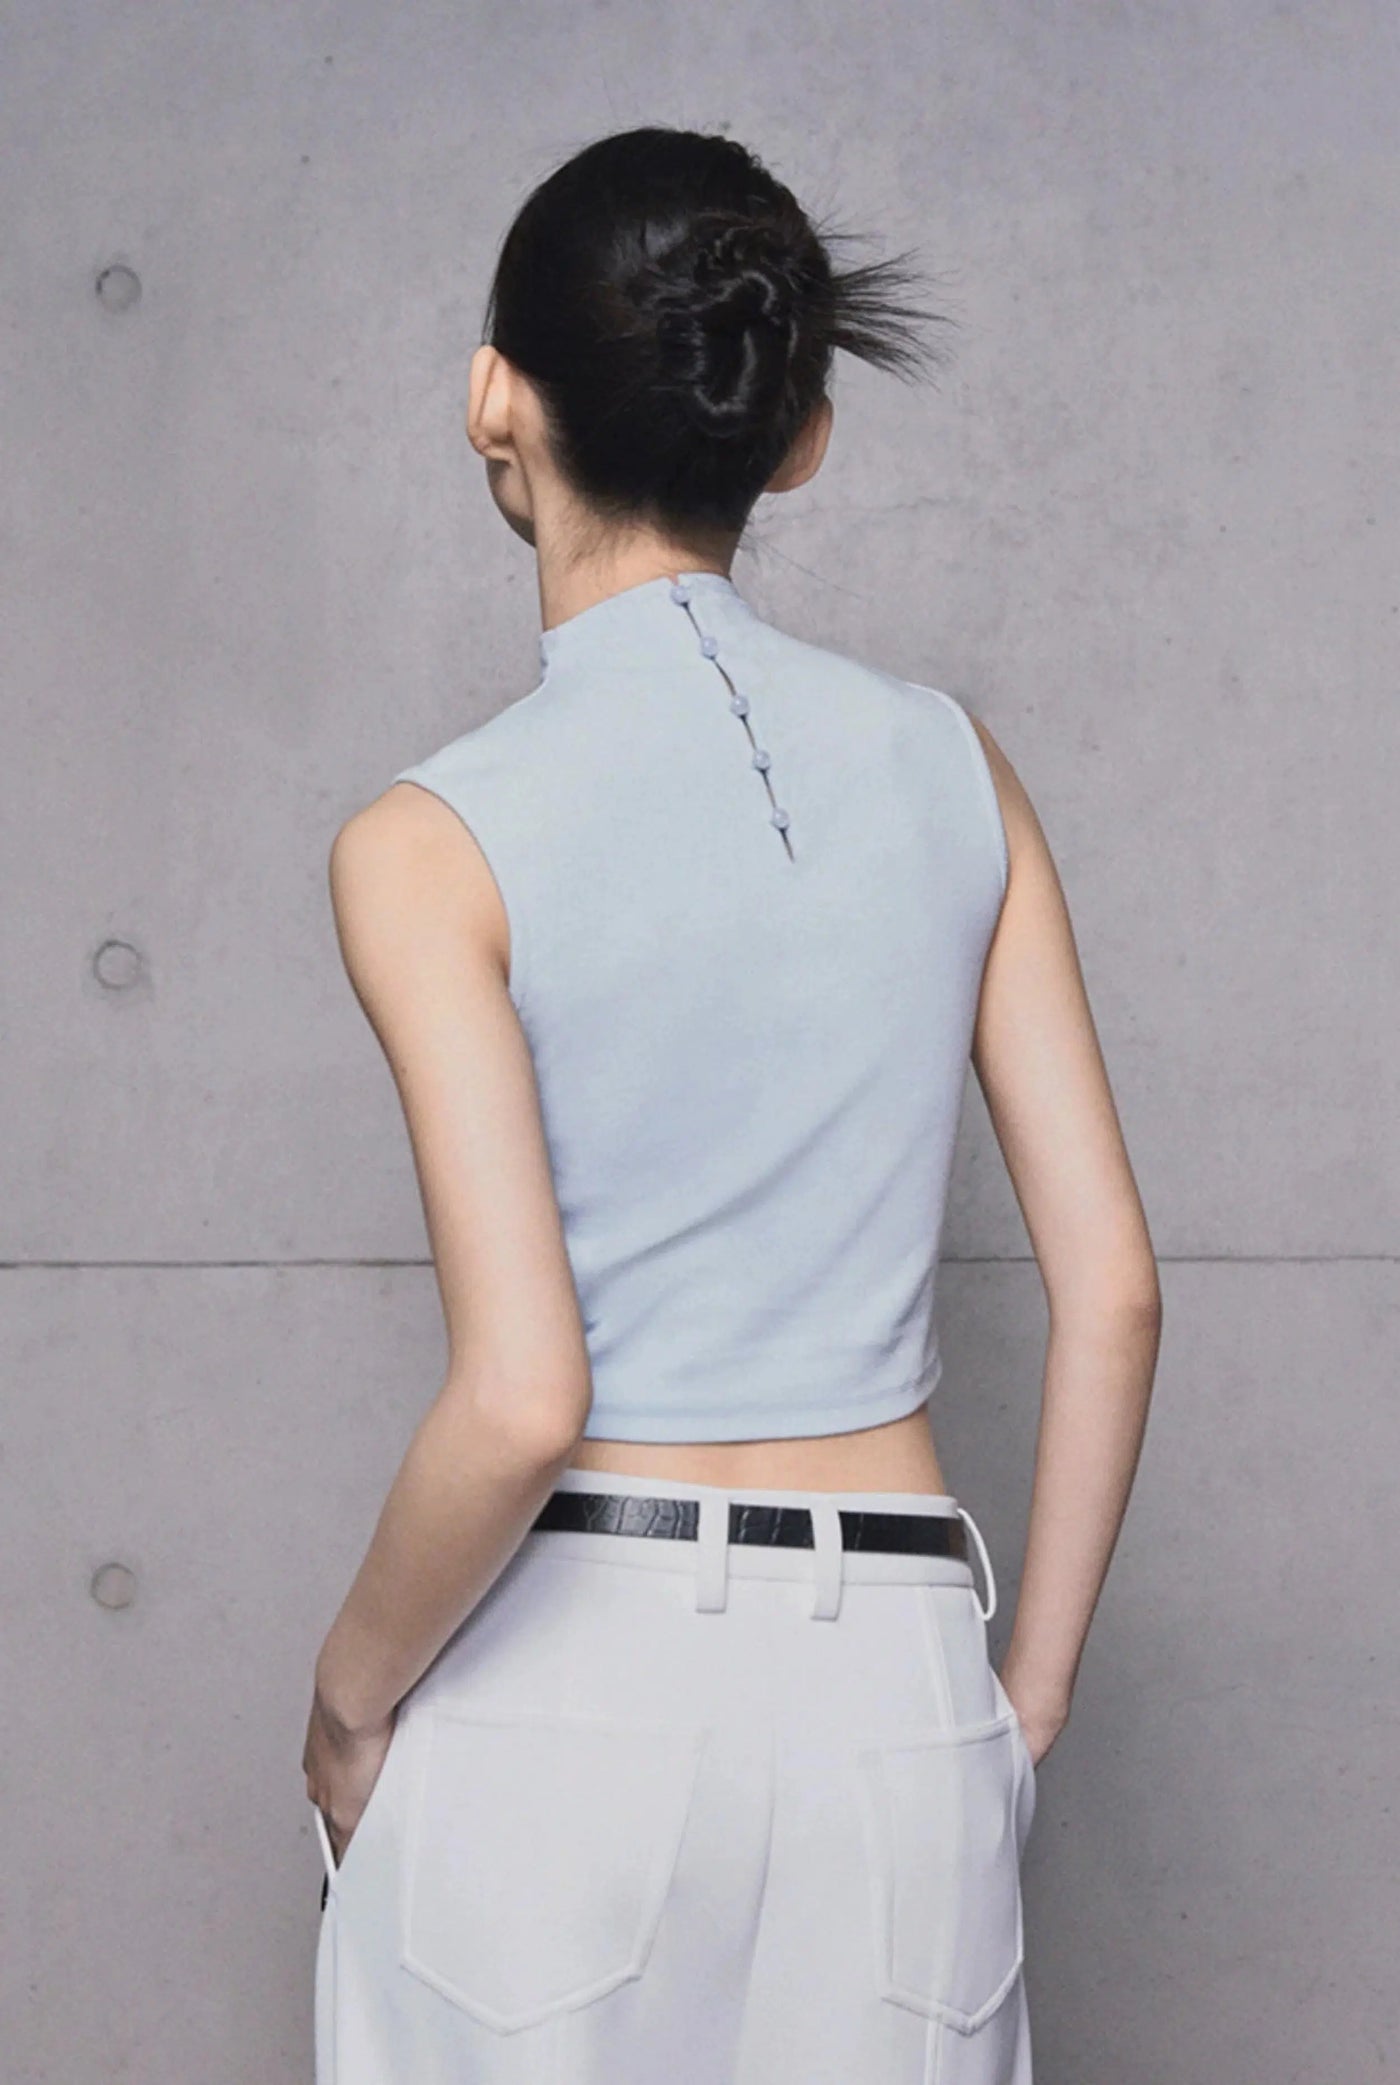 Essential Slim Fit Cropped Vest Korean Street Fashion Vest By Opicloth Shop Online at OH Vault